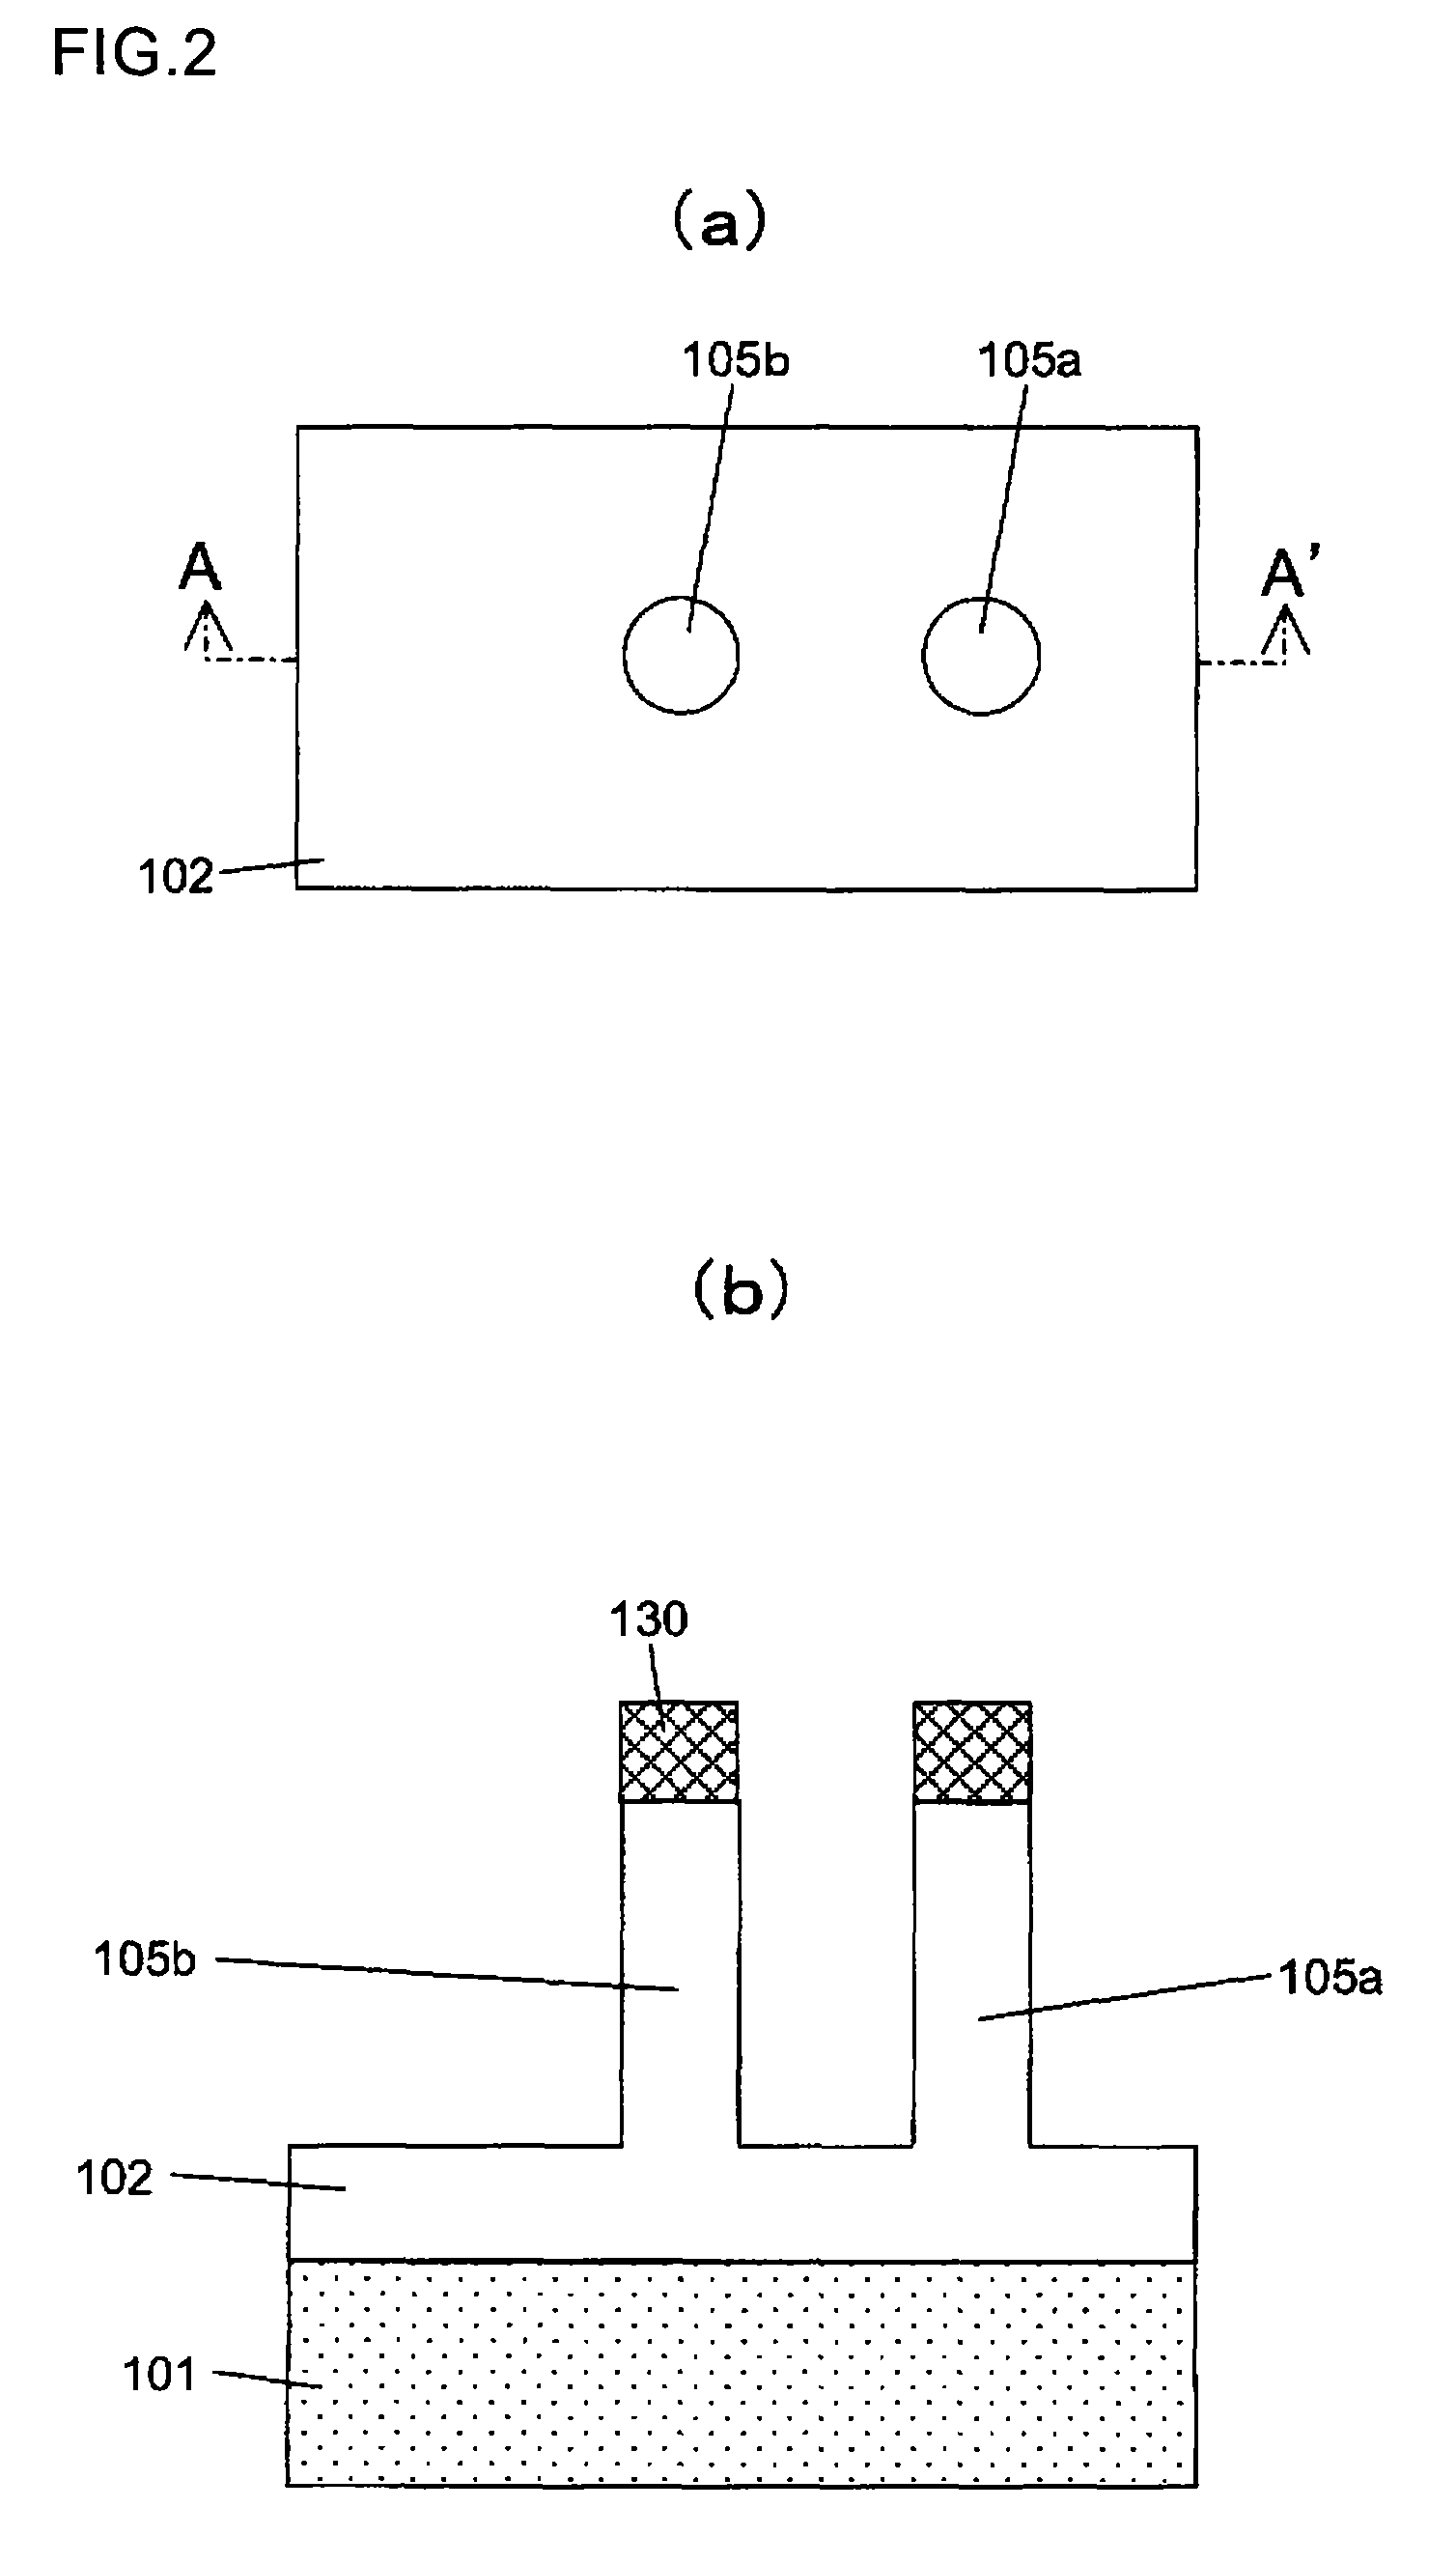 Semiconductor device having increased gate length implemented by surround gate transistor arrangements